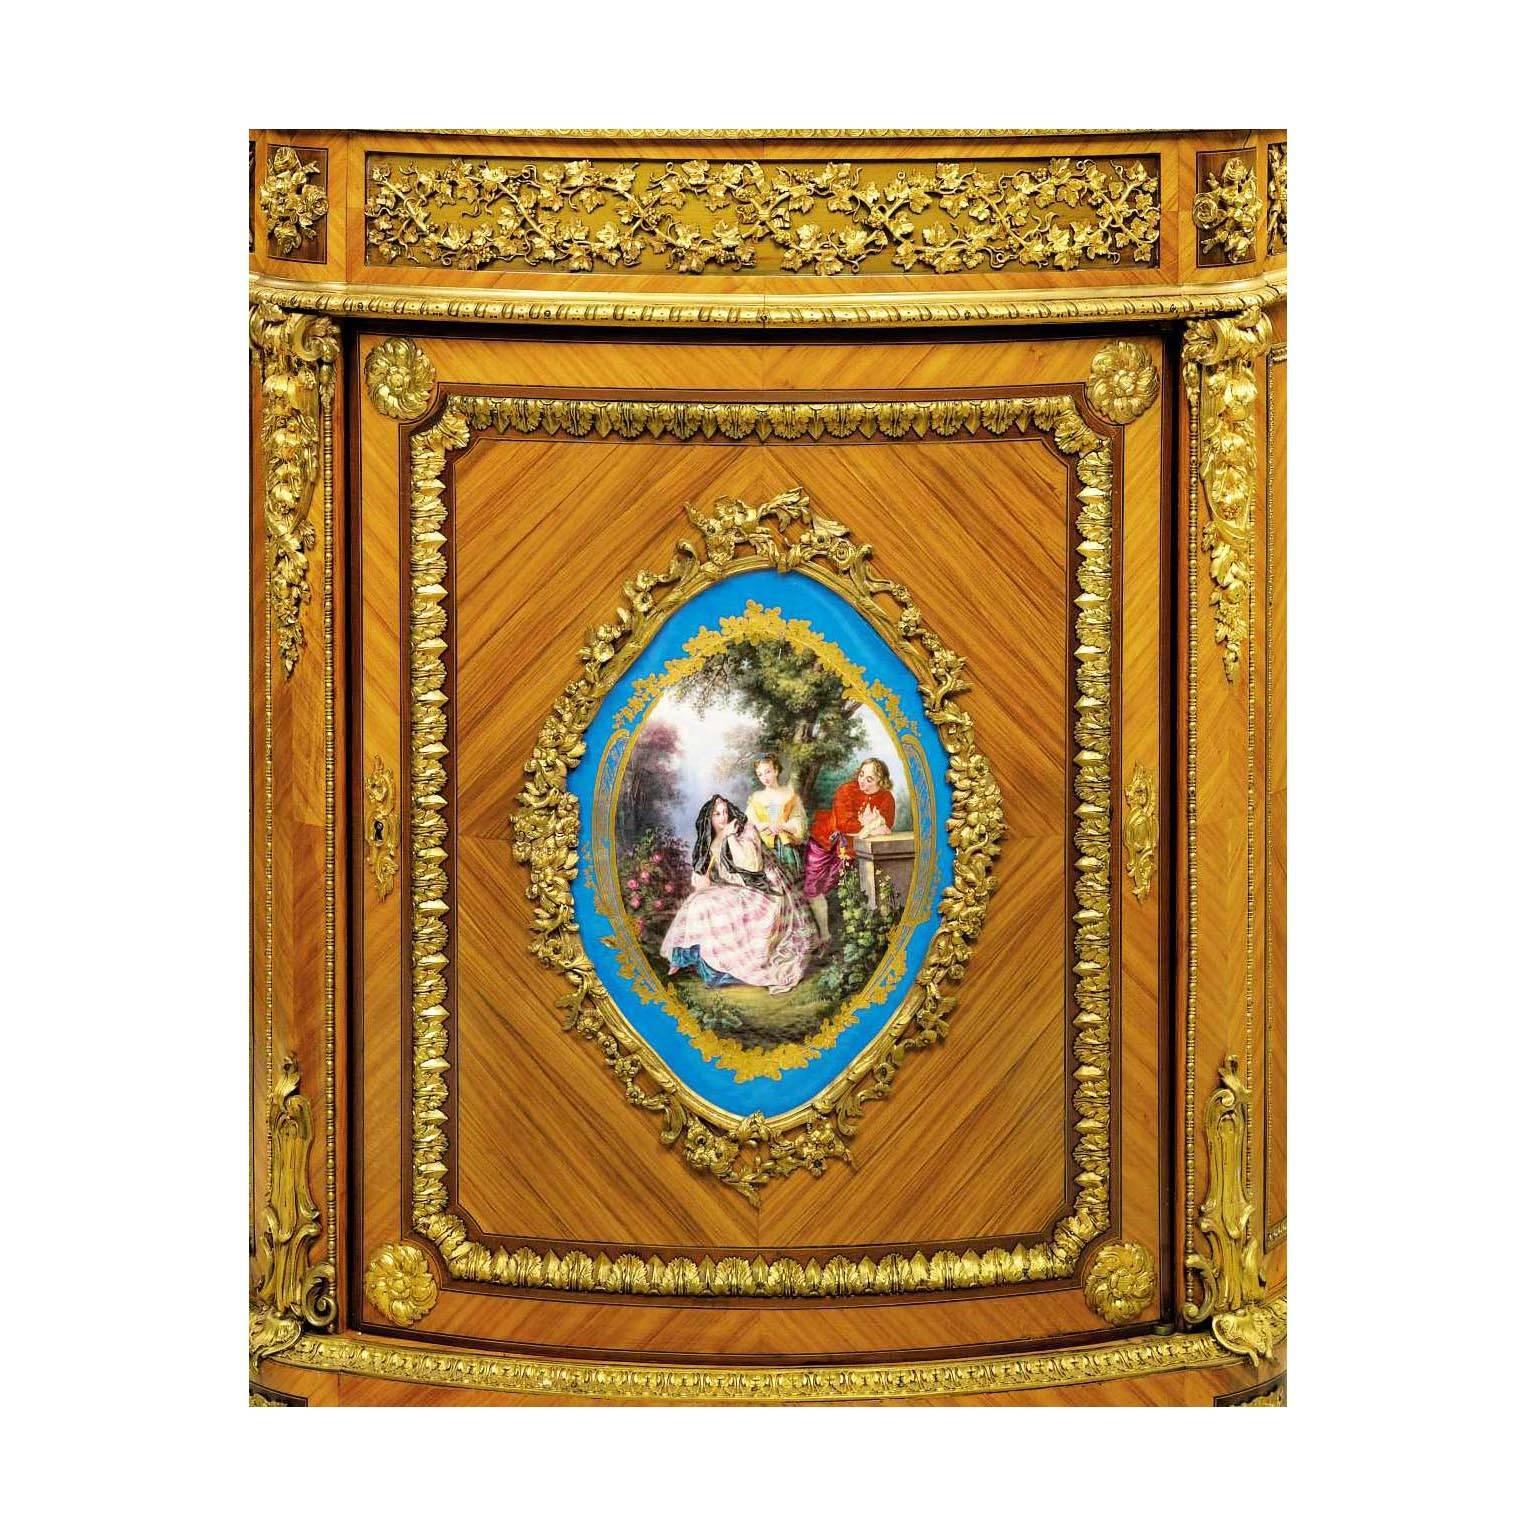 A very fine French Louis XVI style ormolu-mounted and Sèvres style porcelain mounted tulipwood and mahogany Meuble d'Appui (Wall cabinet) with an onyx marble top. The serpentine single-door body surmounted with finely chased gilt-bronze mounts